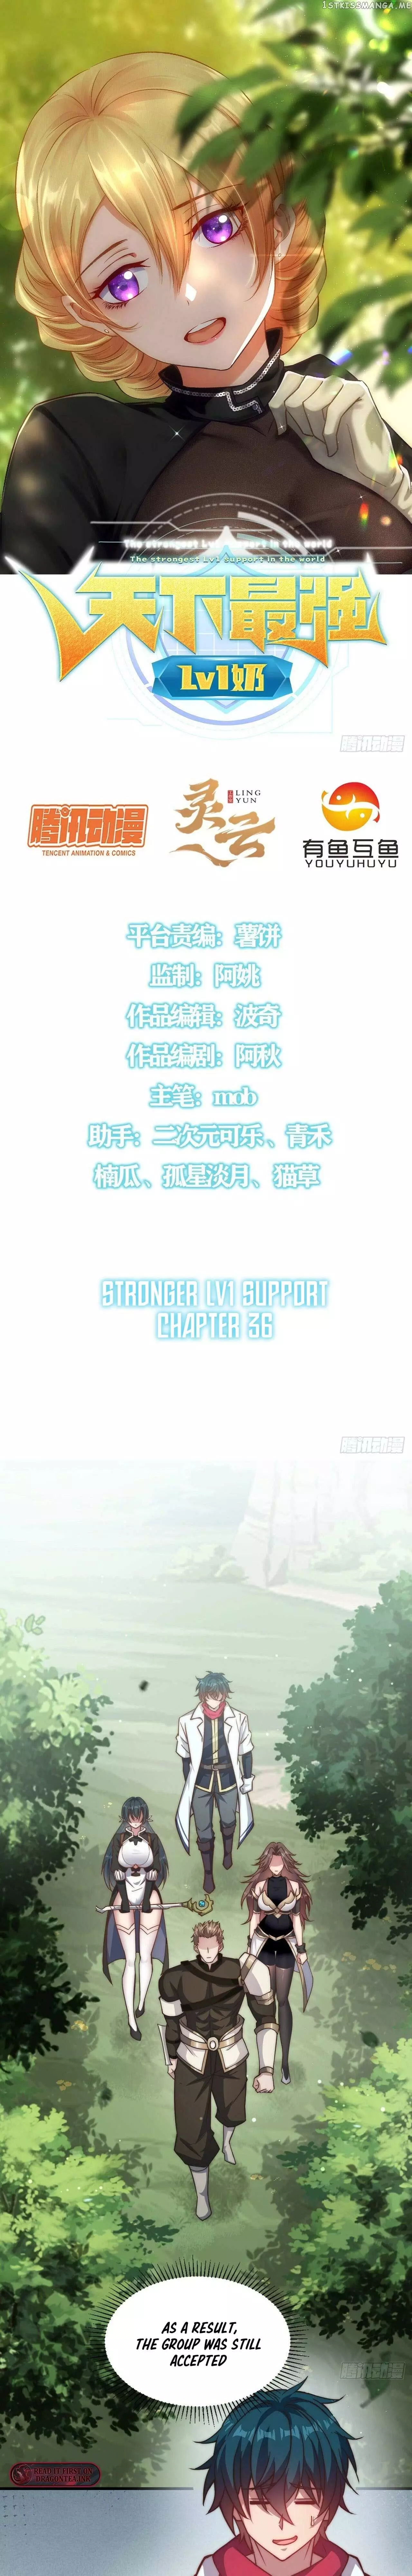 The Strongest Lvl1 Support - 36 page 1-dd957641